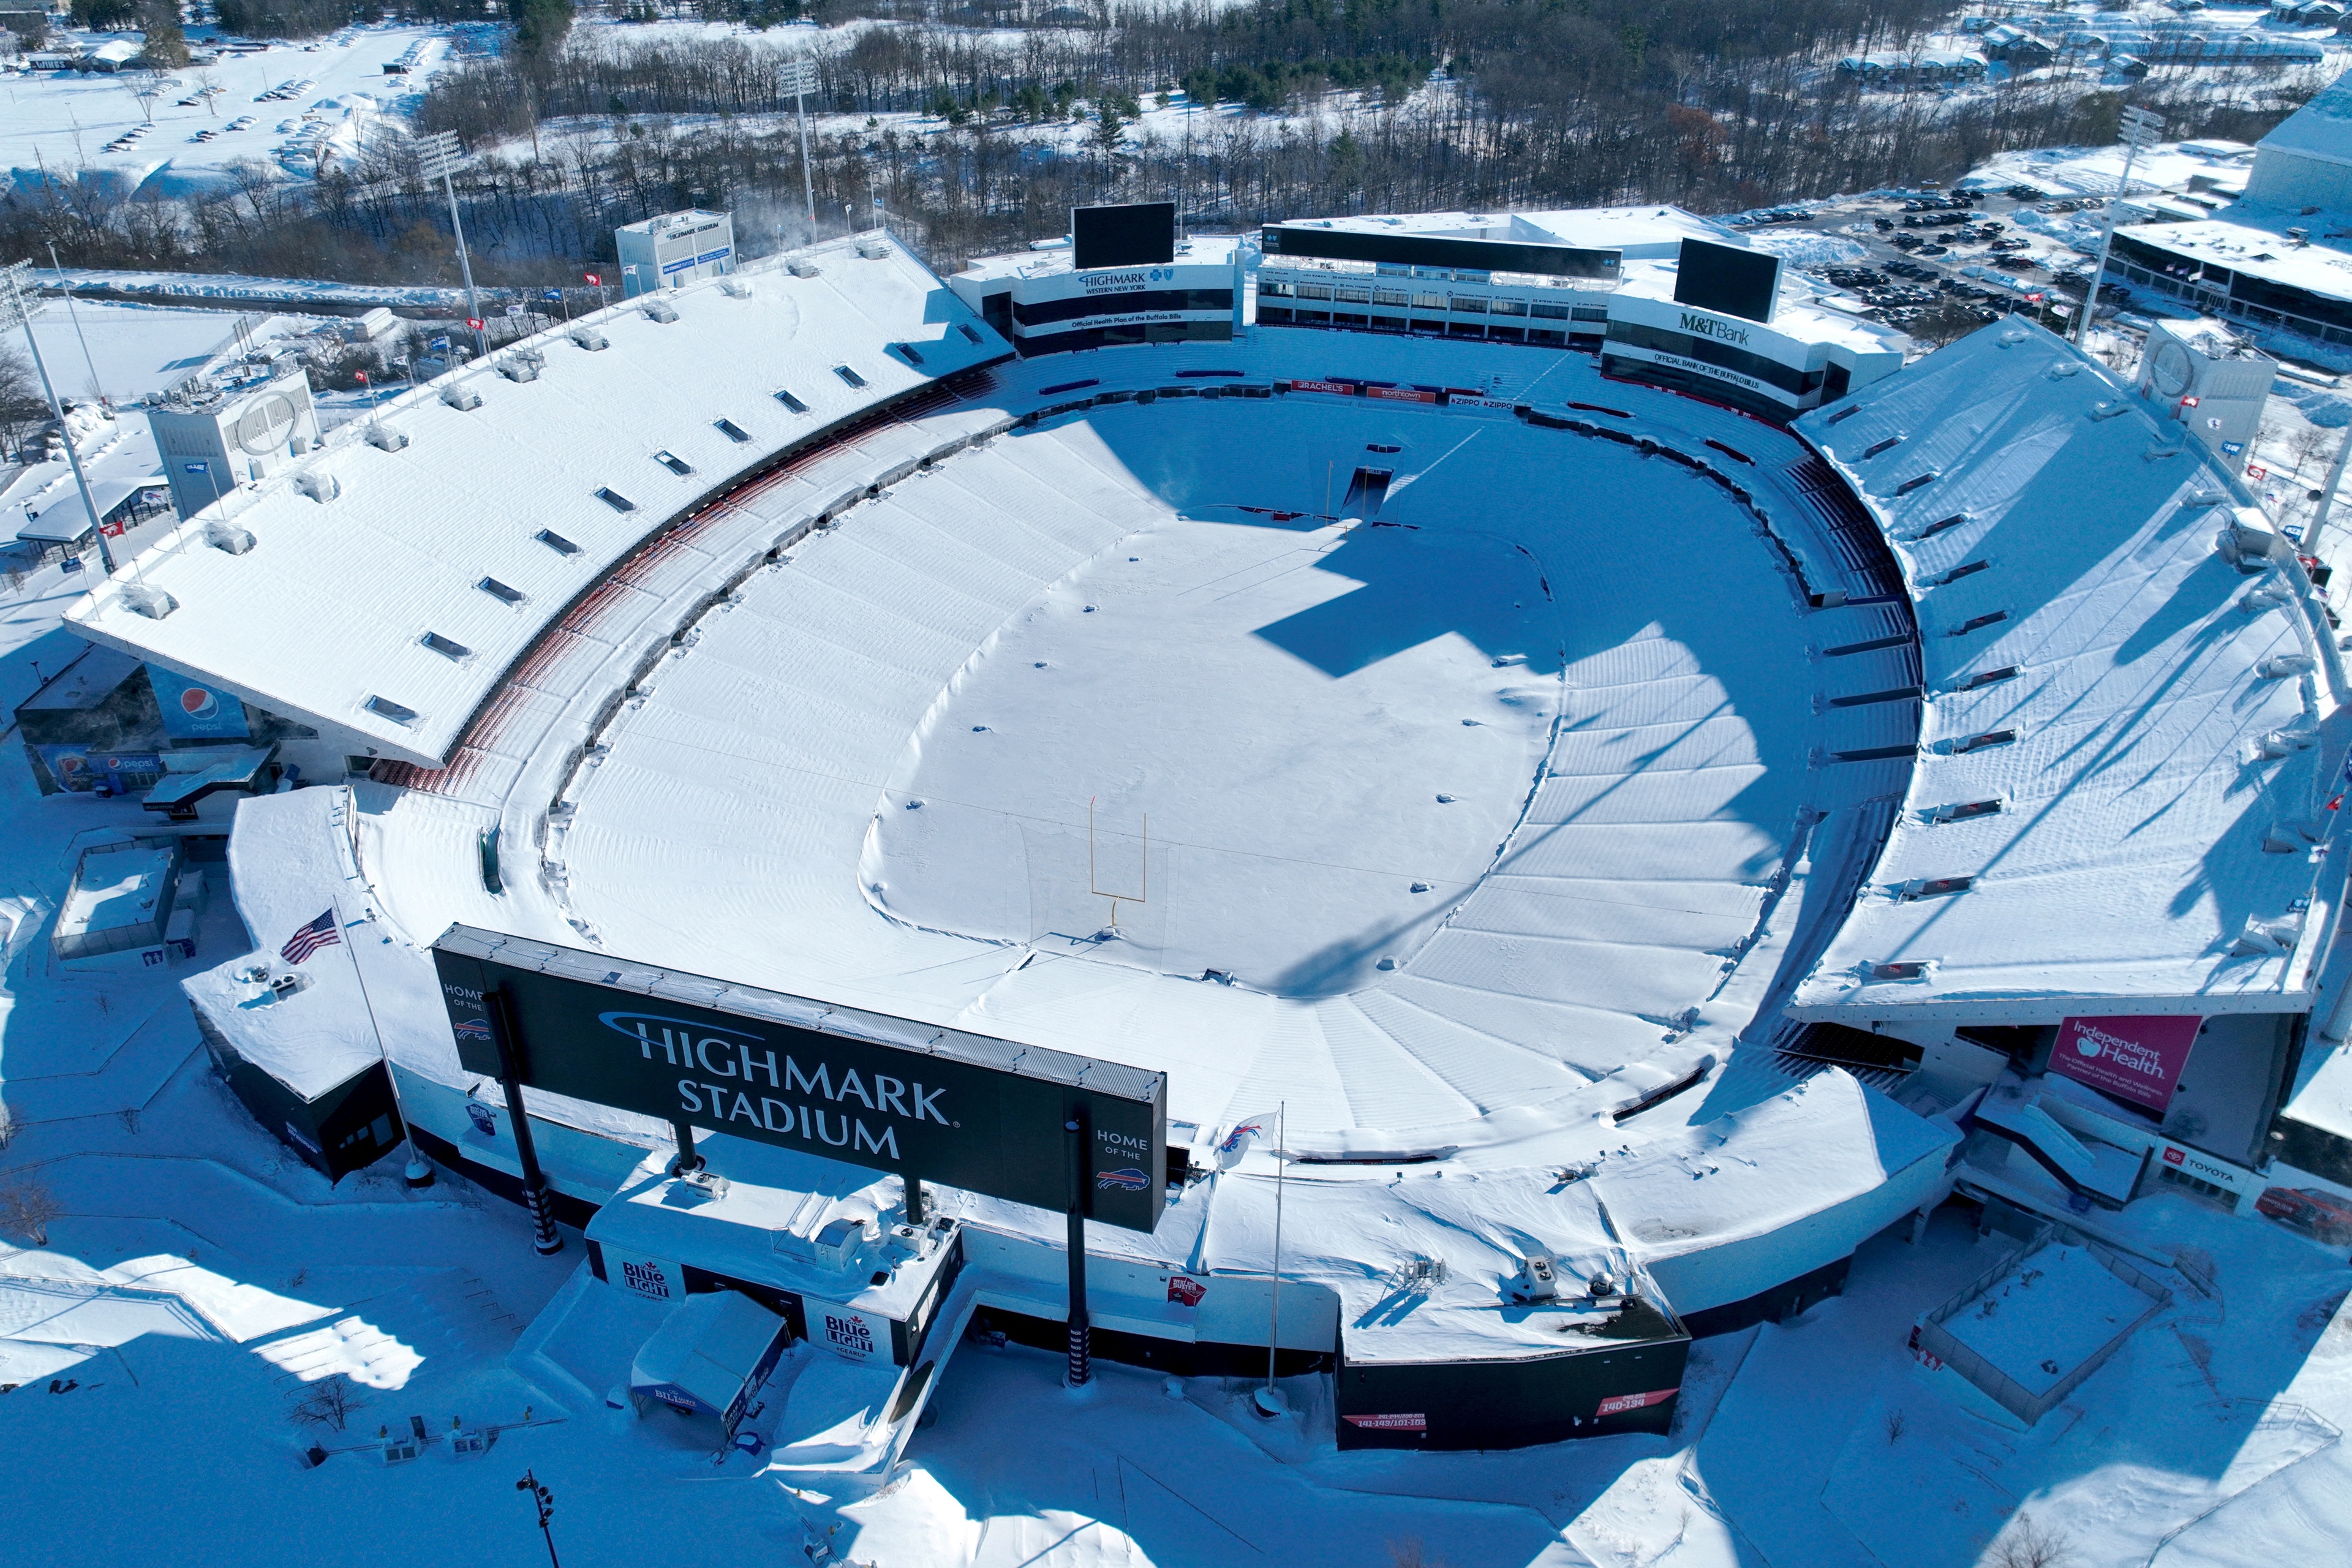 FILE PHOTO: The Buffalo Bills' NFL team's Highmark Stadium is covered in snow after a recent storm in Orchard Park, New York, U.S. November 21, 2022.  REUTERS/Drone Base/File Photo